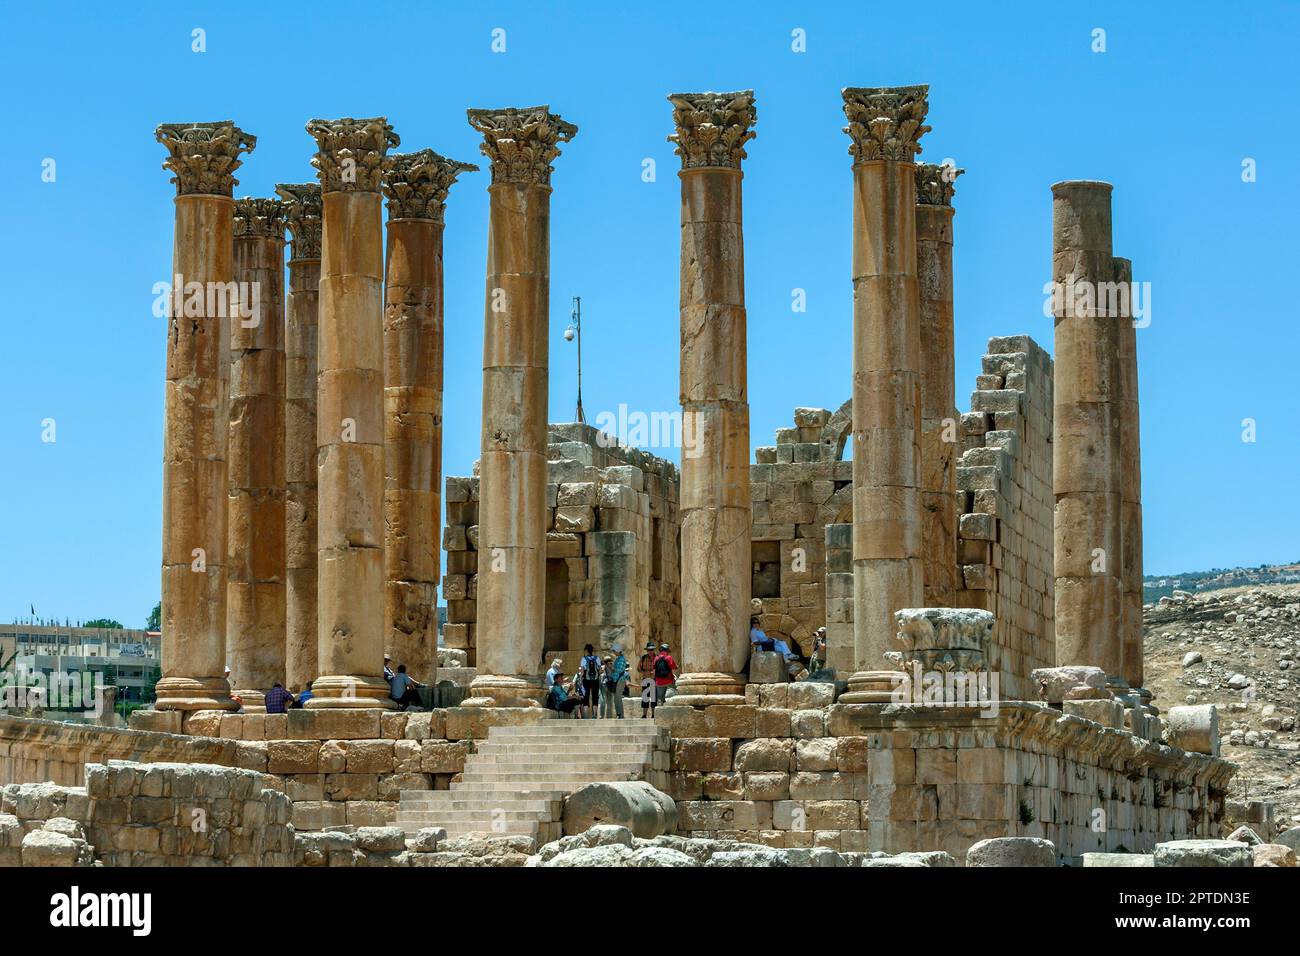 JARASH, JORDAN - JUNE 08, 2014 : Tourists gather at the base of the giant stone columns of the Temple of Artemis at the ancient site of Jarash in Jord Stock Photo